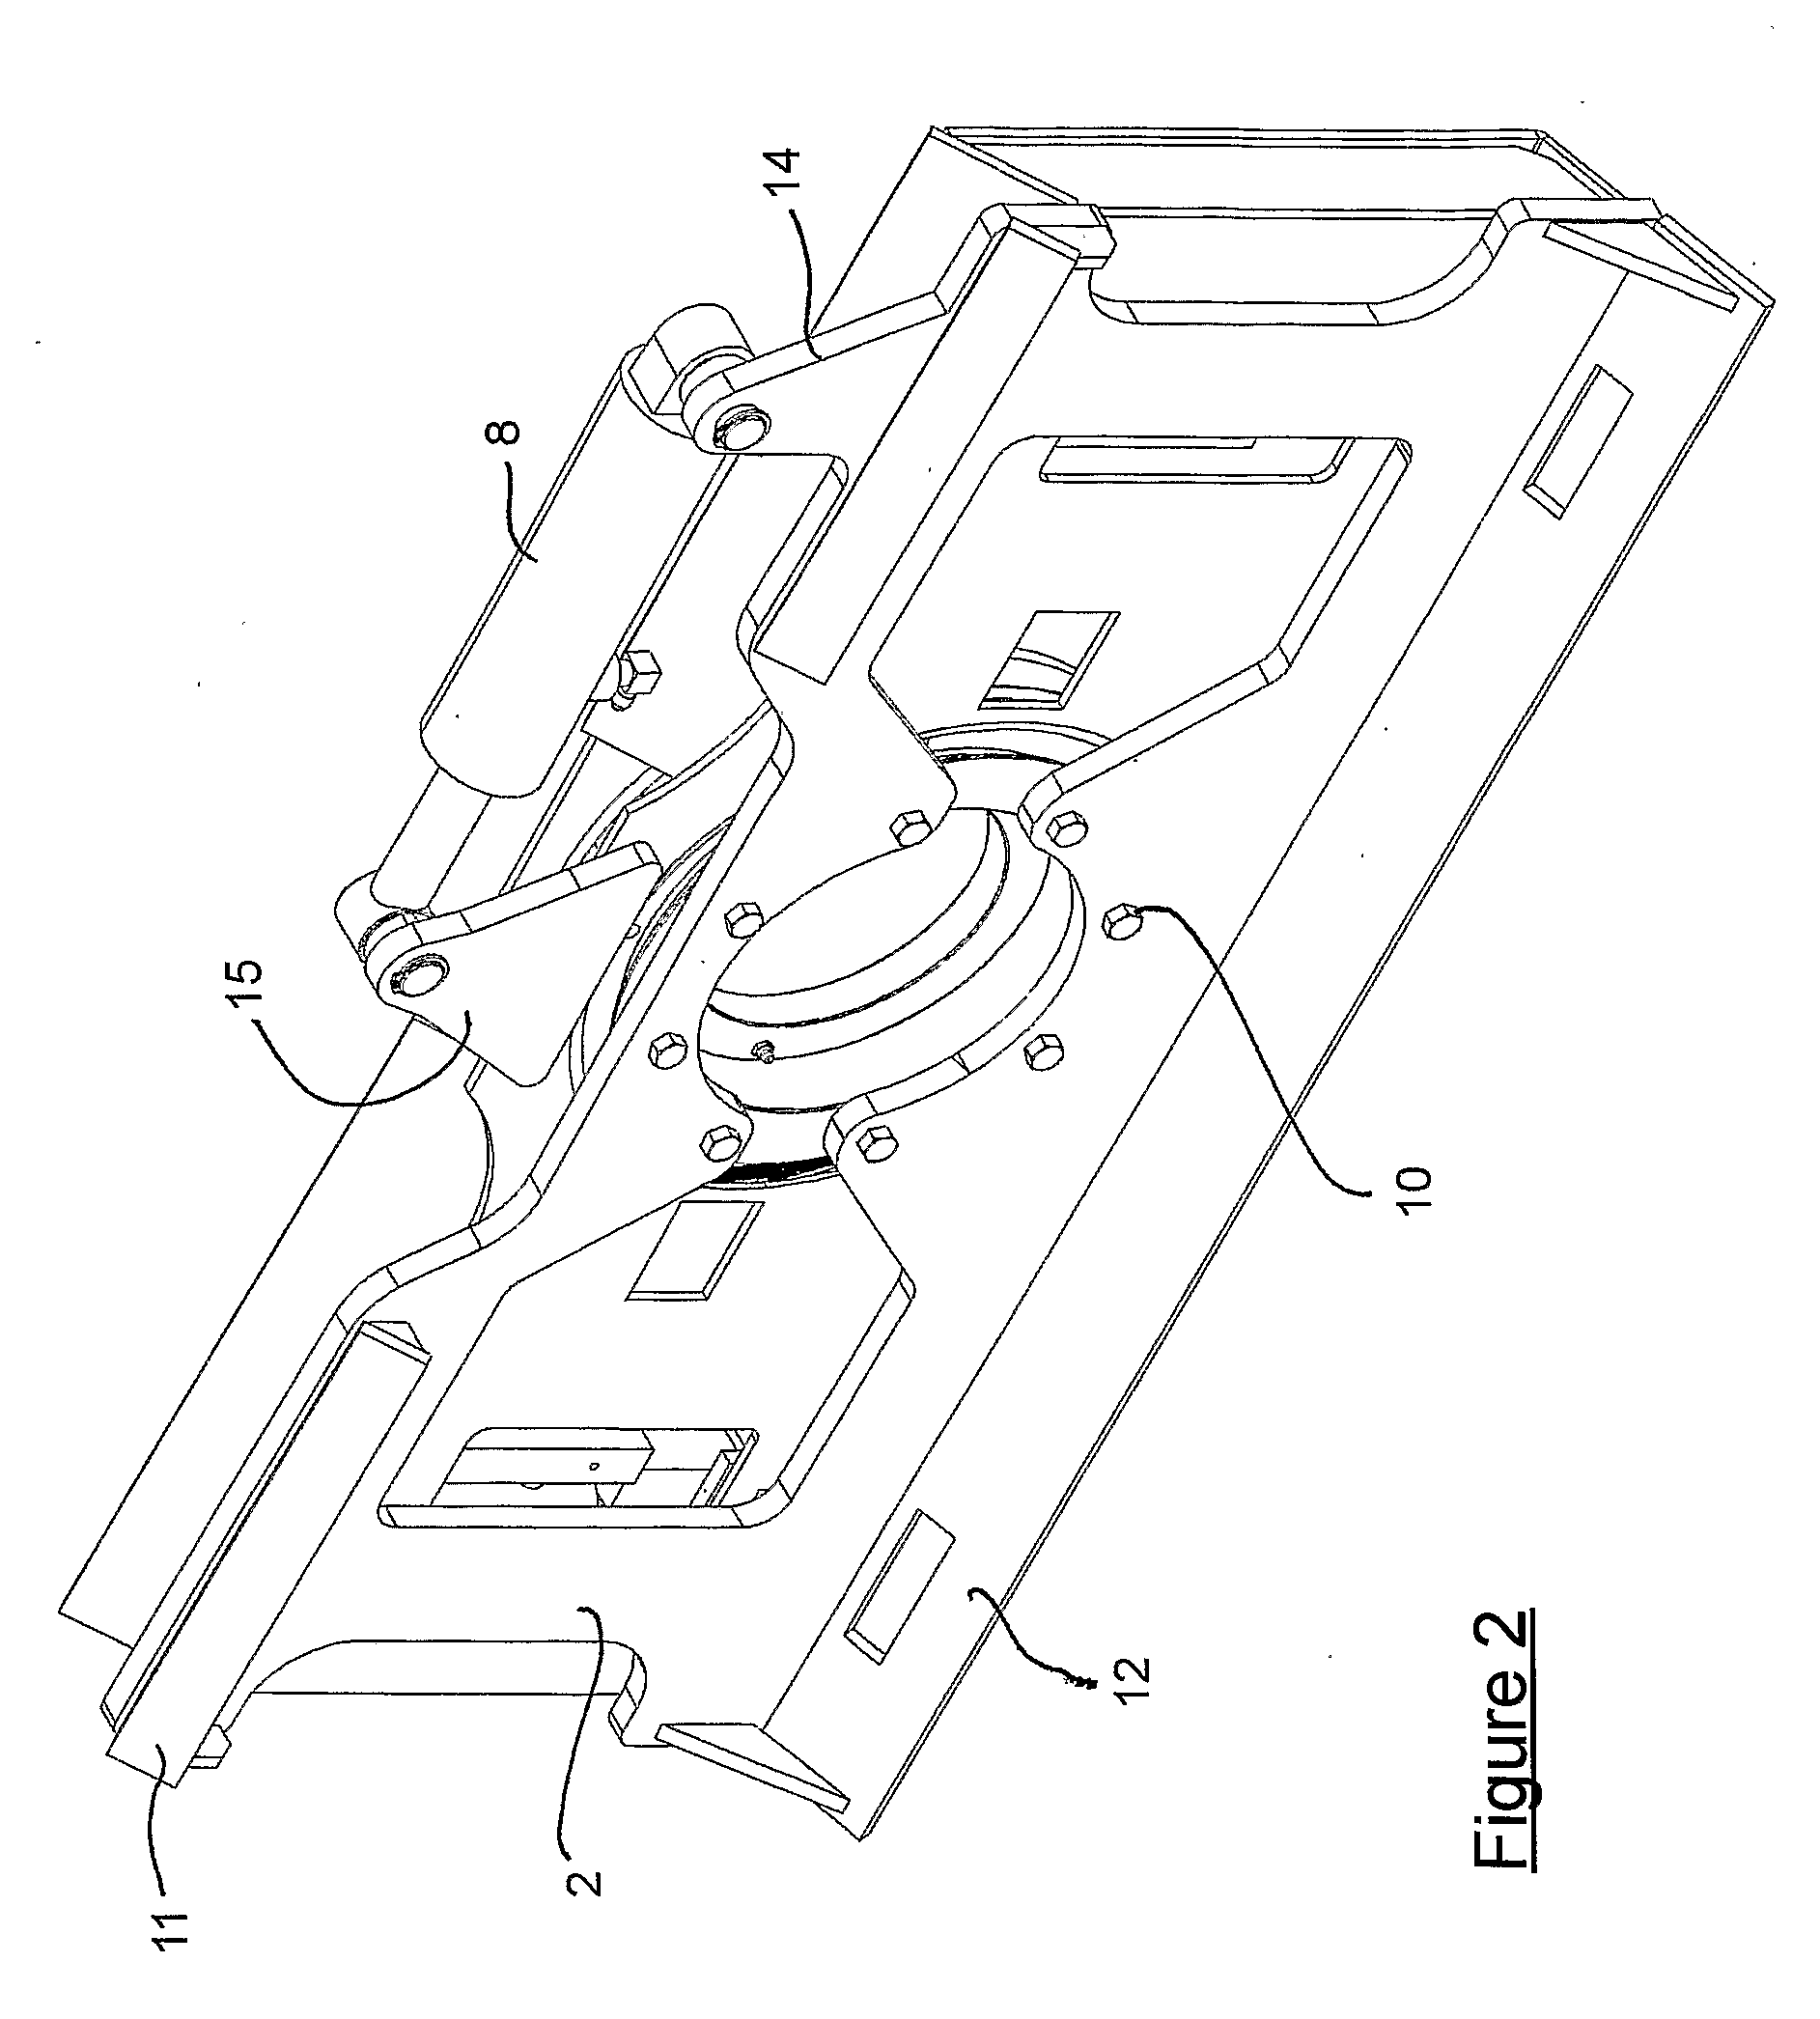 Tilting Accessory Hitch With Specific Bearing Design